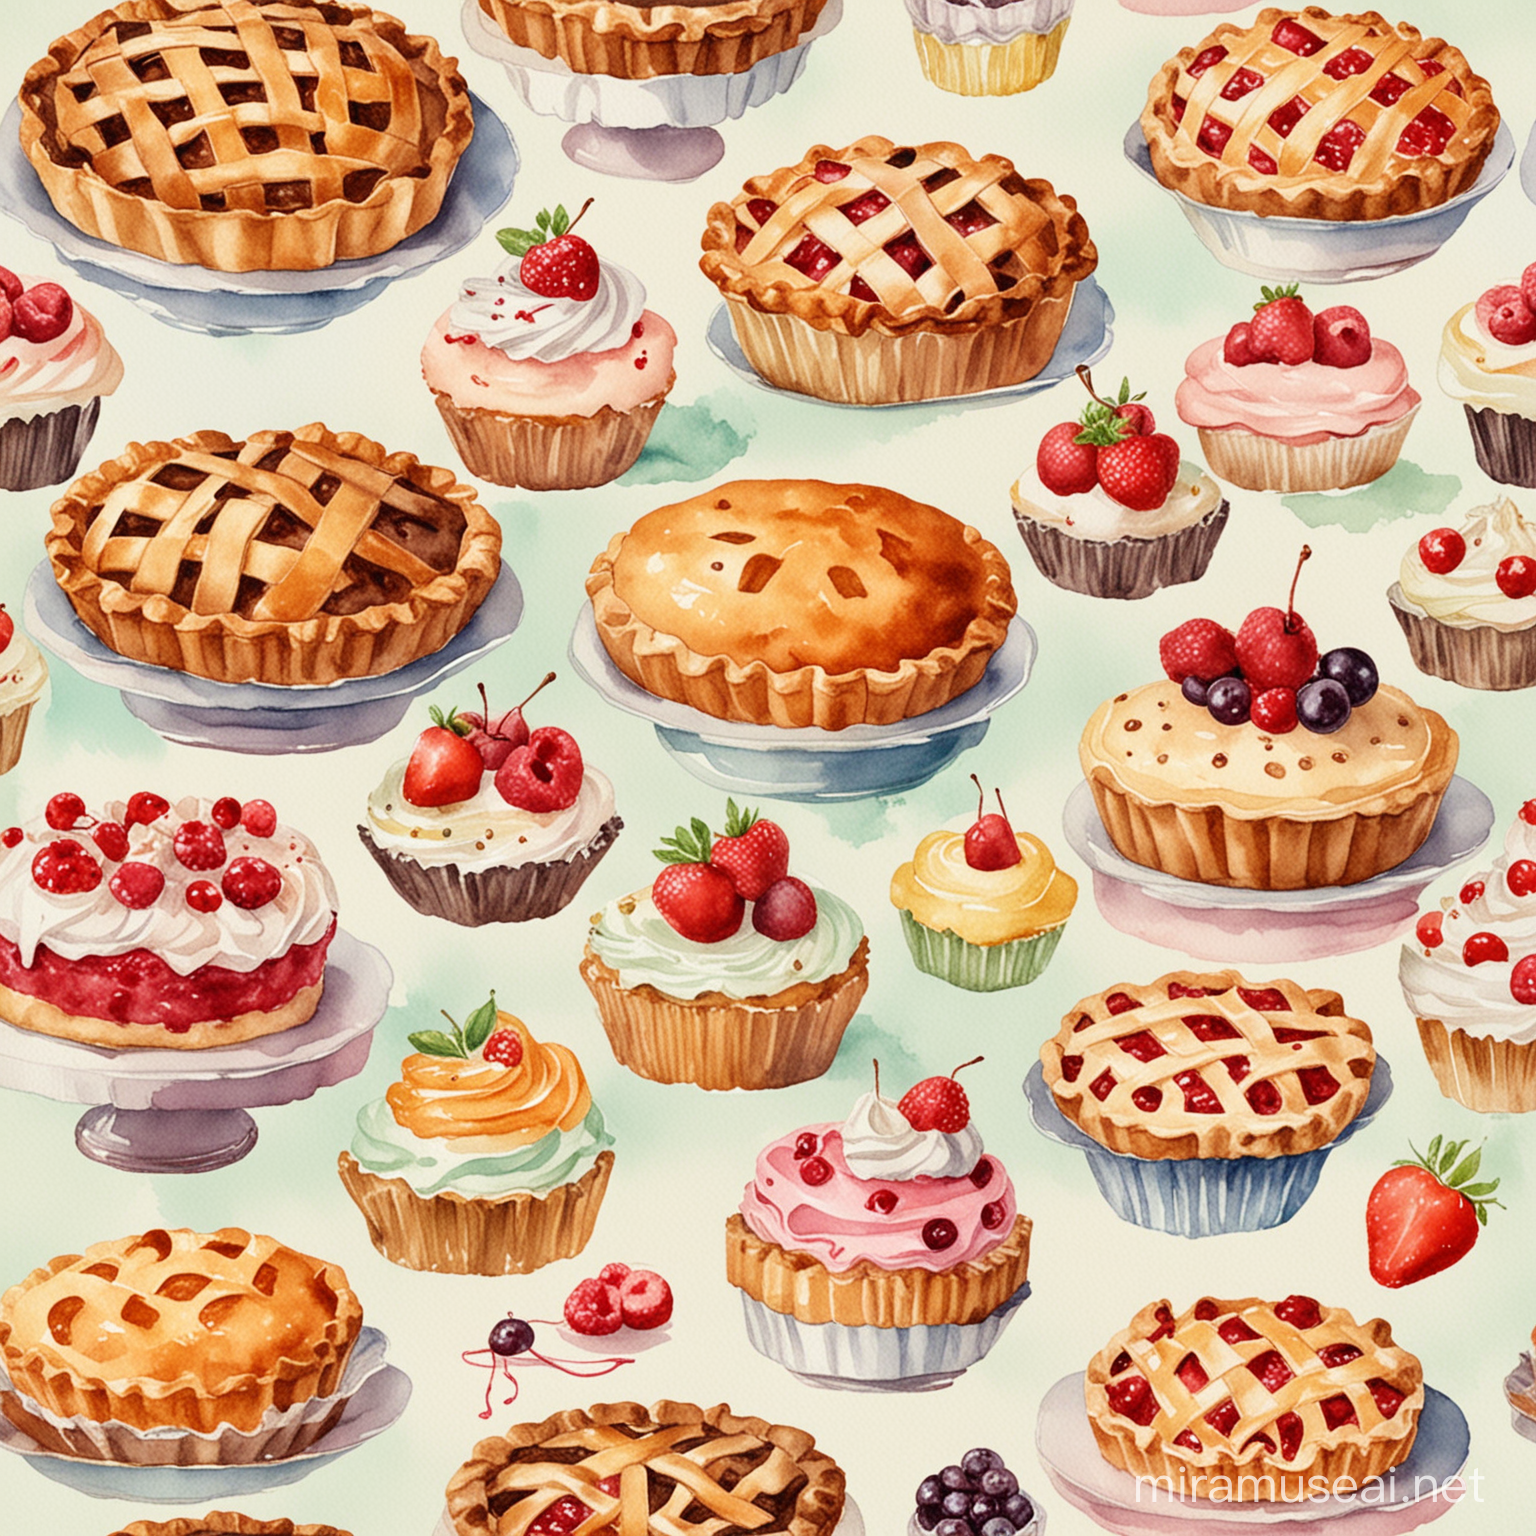 Vintage Watercolor Illustrations of Pies and Cakes